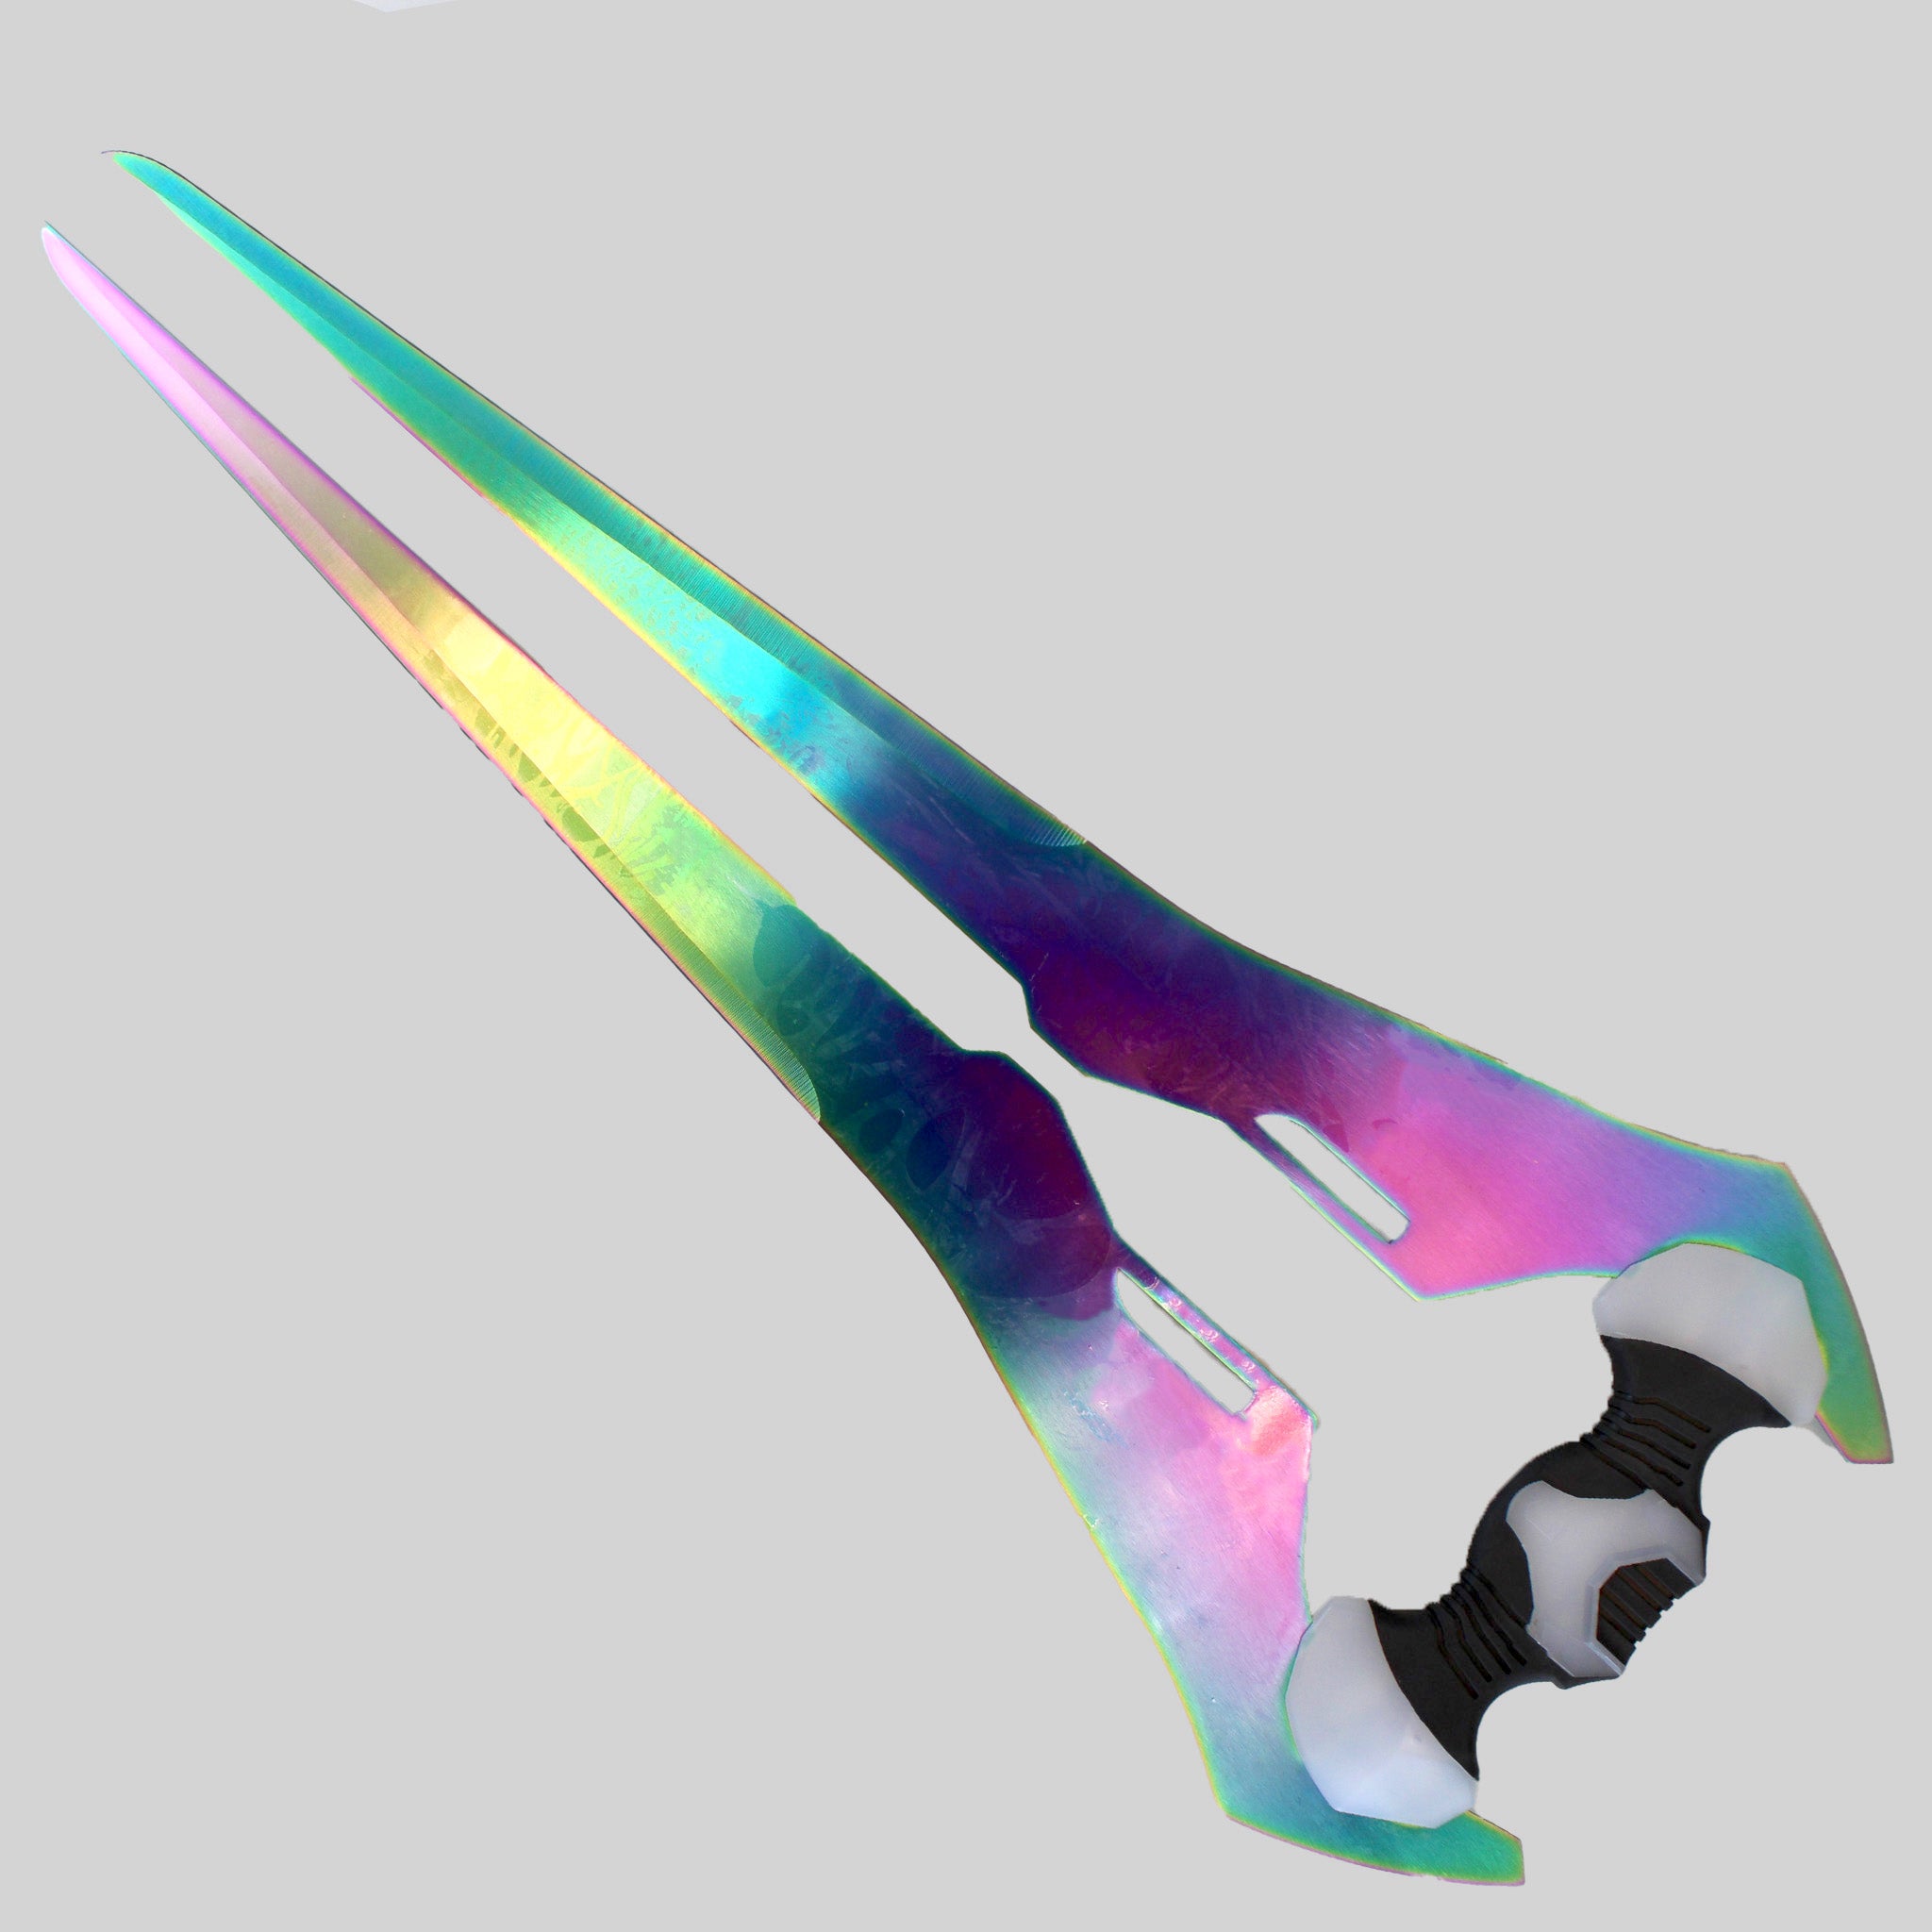 Type-1 Energy Sword (Halo) Iridescent Anodized Pattern Metal Prop Repl ...